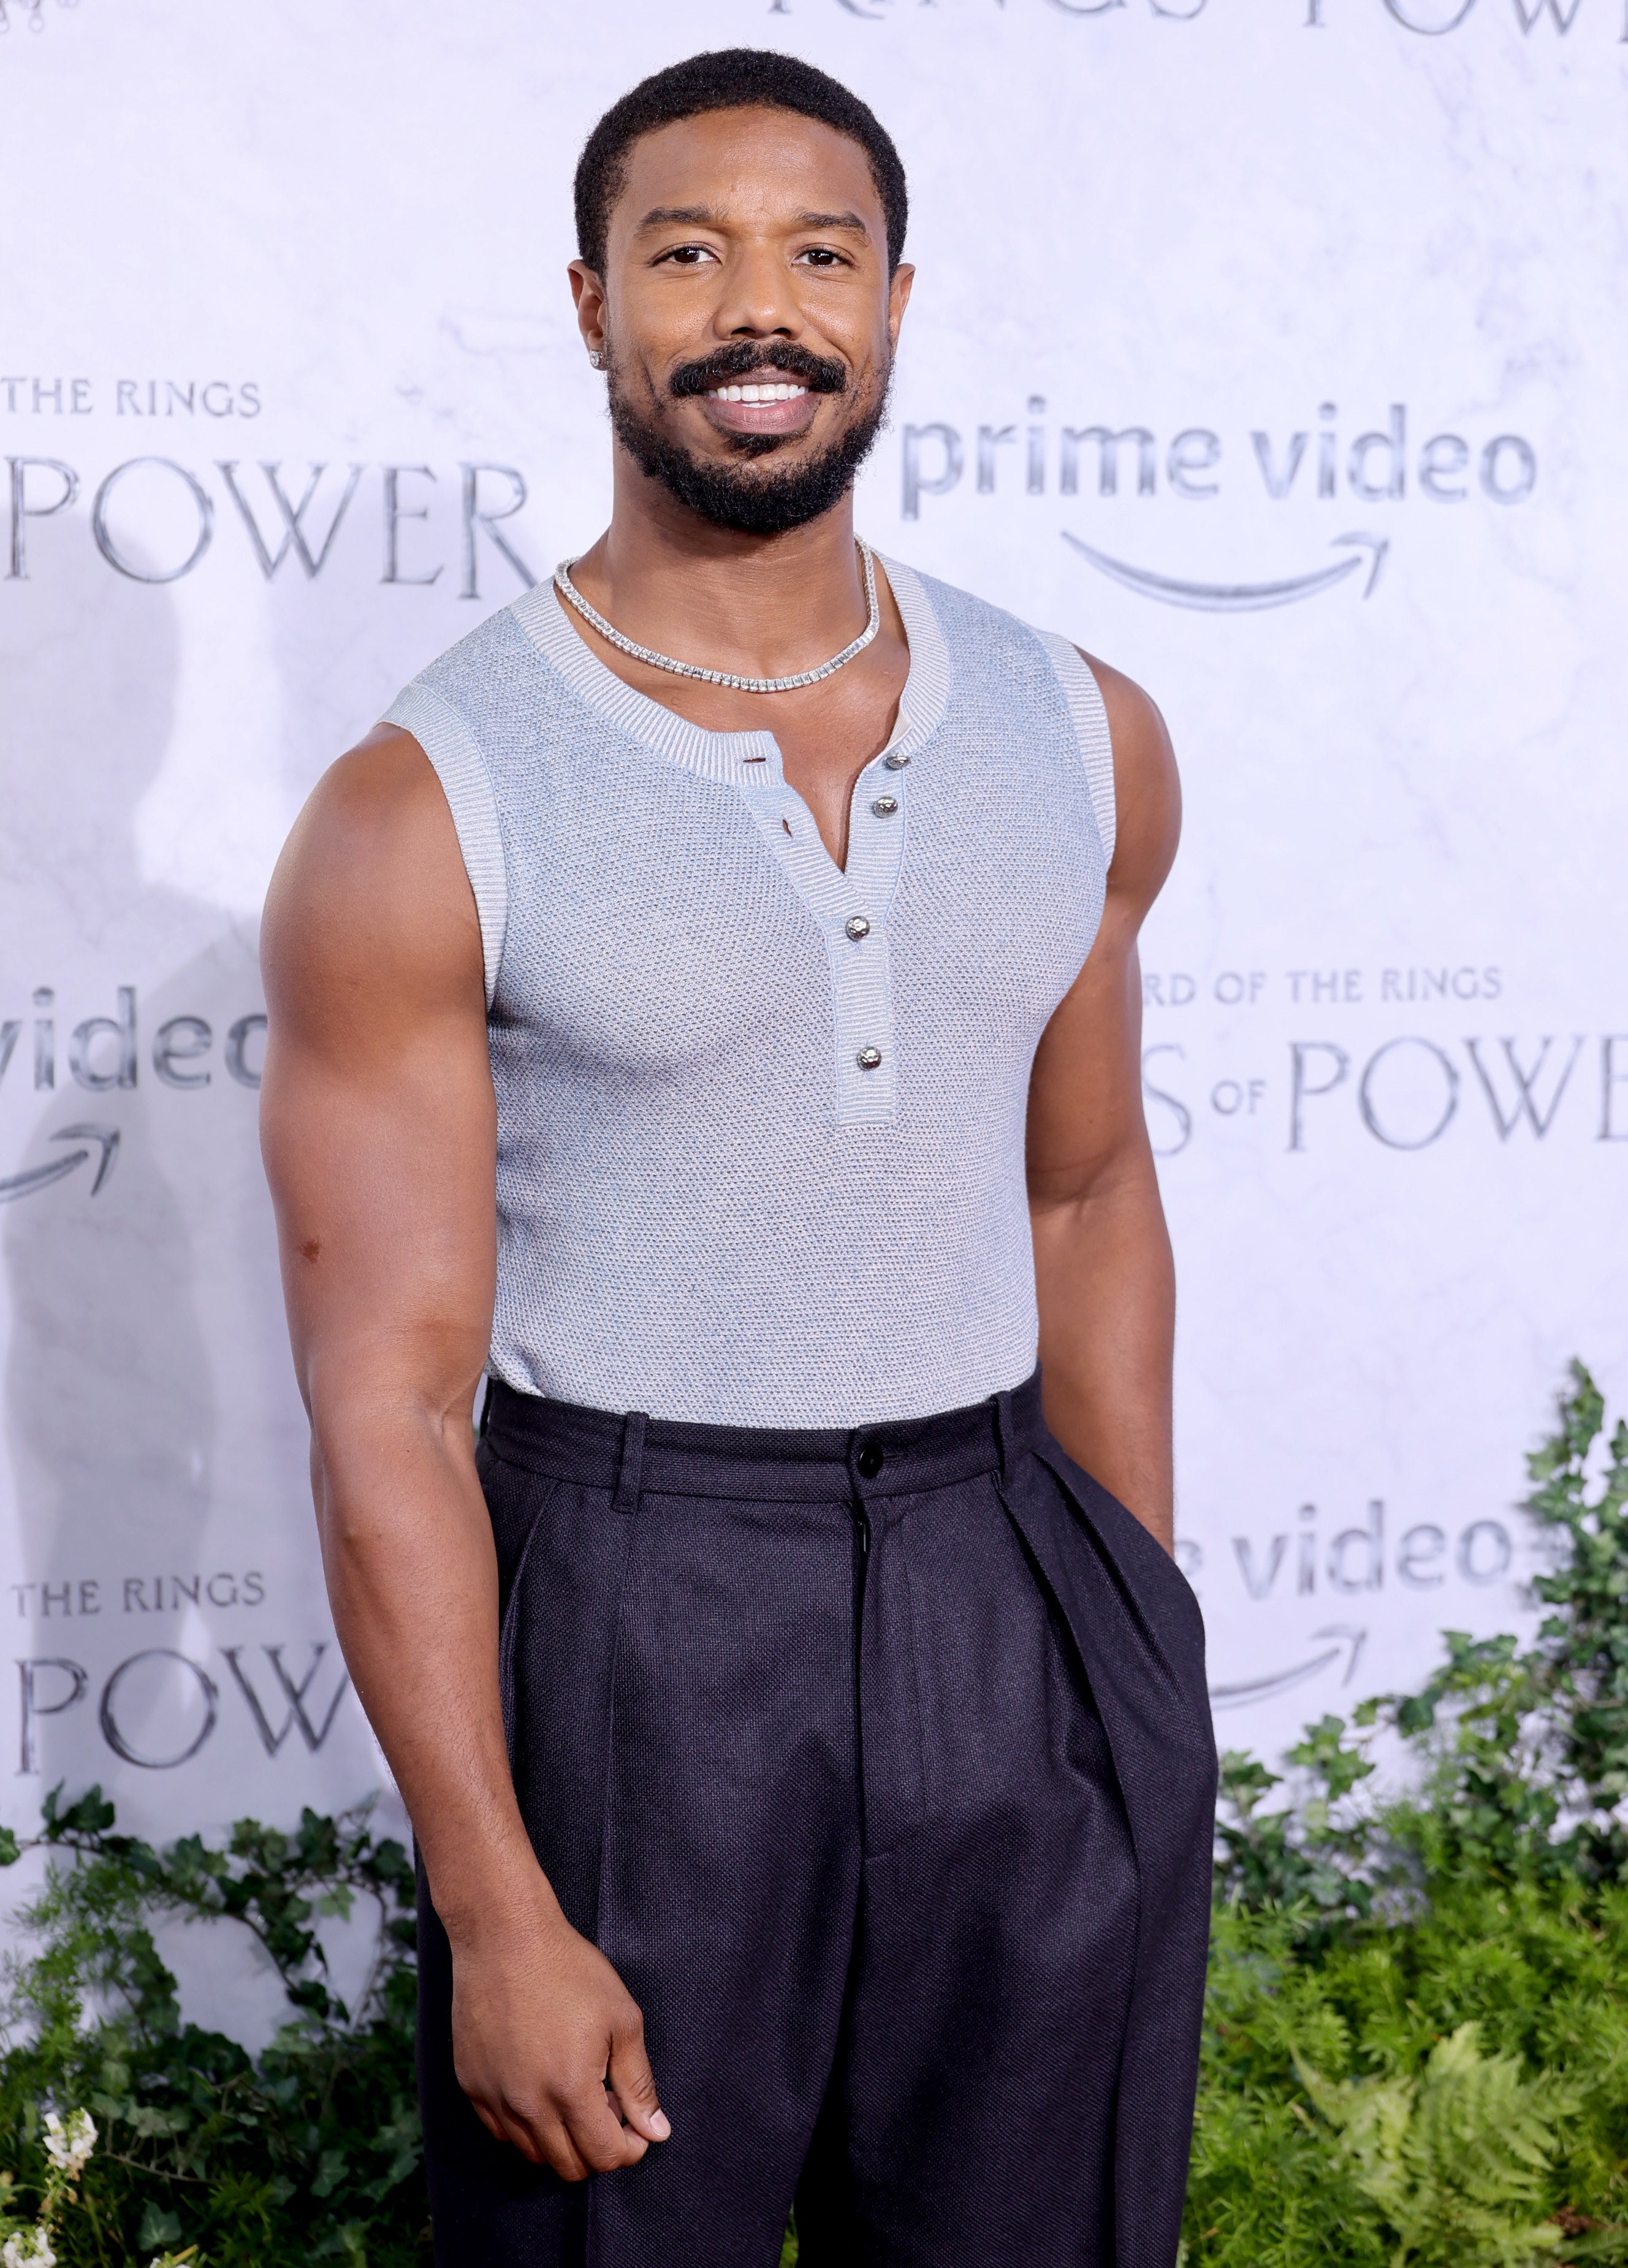 Michael B. Jordan at the premiere of The Lord of the Rings: The Rings of Power